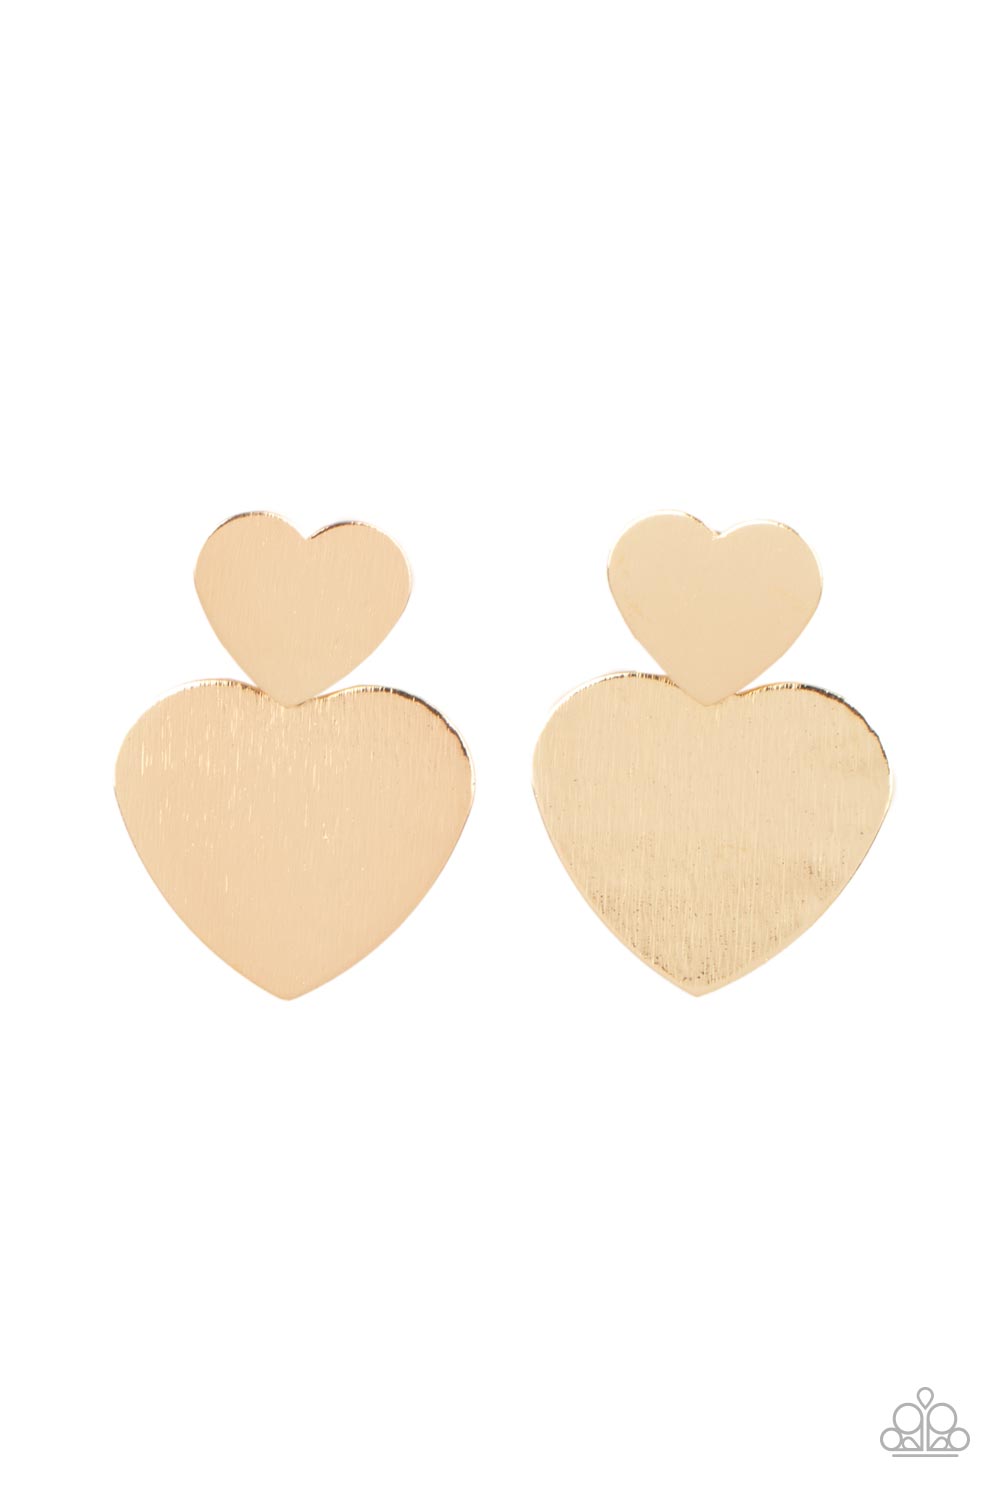 Heart-Racing Refinement - Gold Earrings - Paparazzi Accessories - GlaMarous Titi Jewels